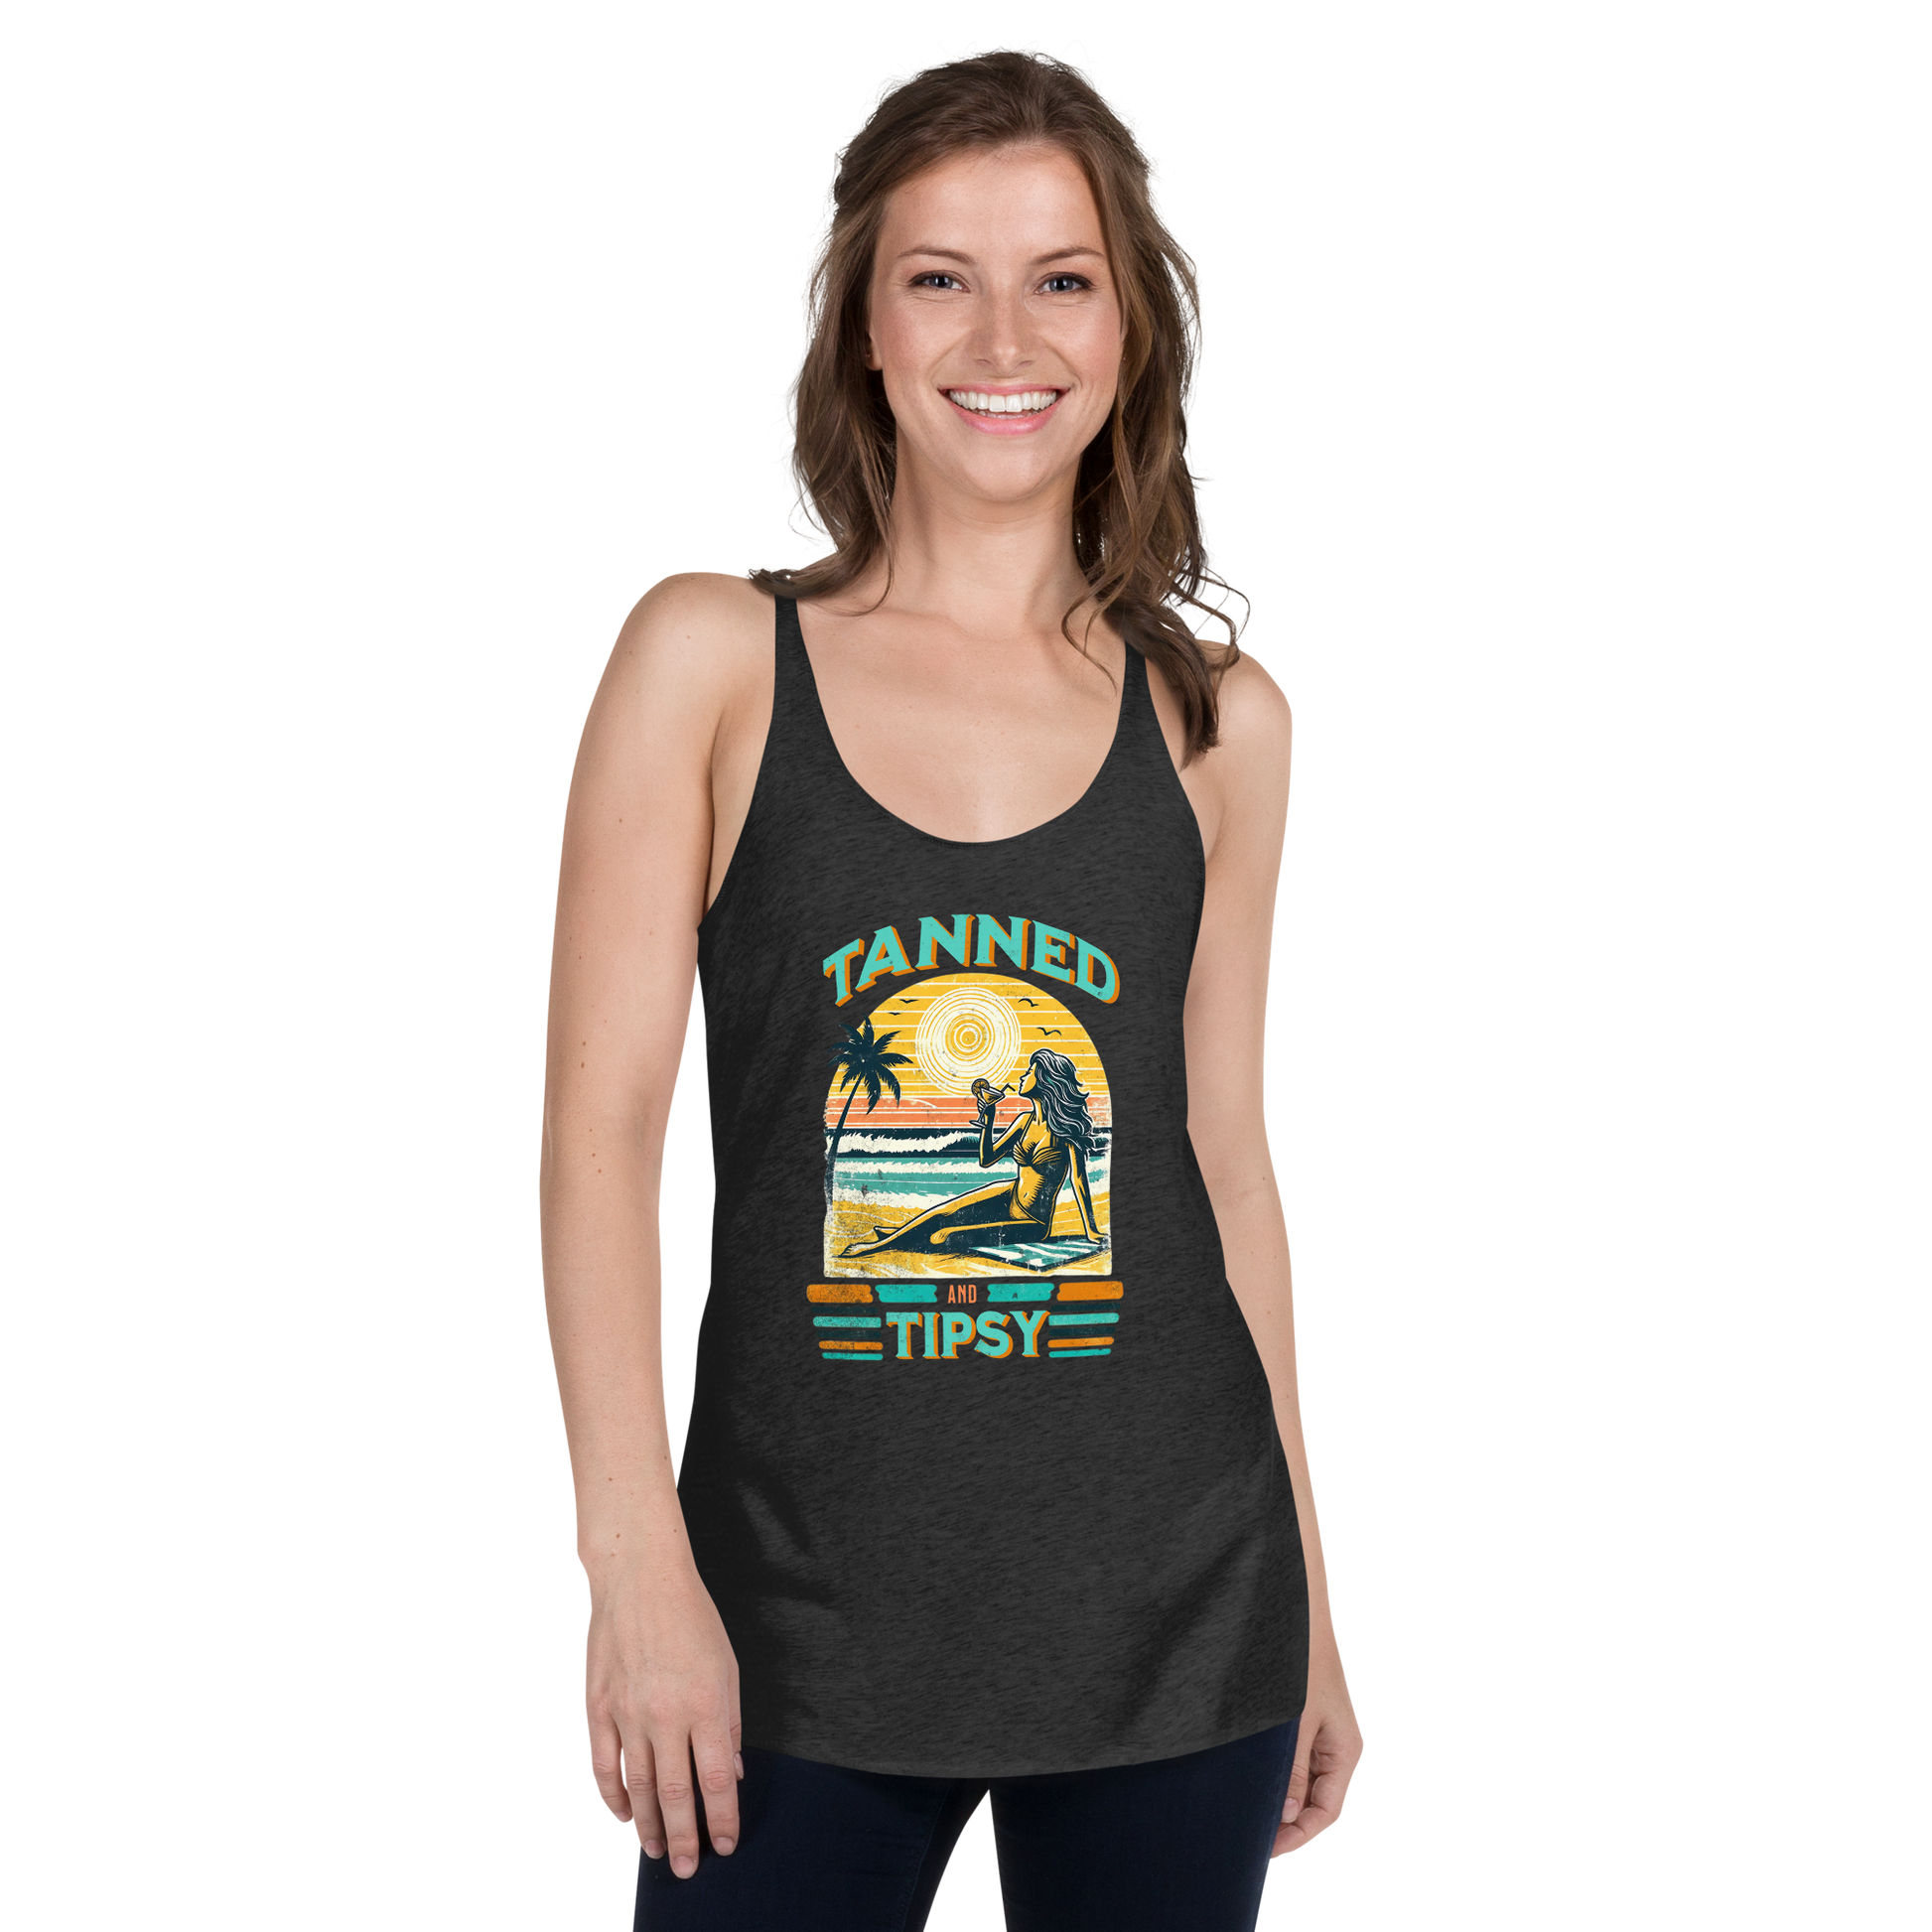 Retro 'Tanned and Tipsy' racerback tank with a woman enjoying a sunset cocktail on the beach, ideal for summer beach parties and day drinking.